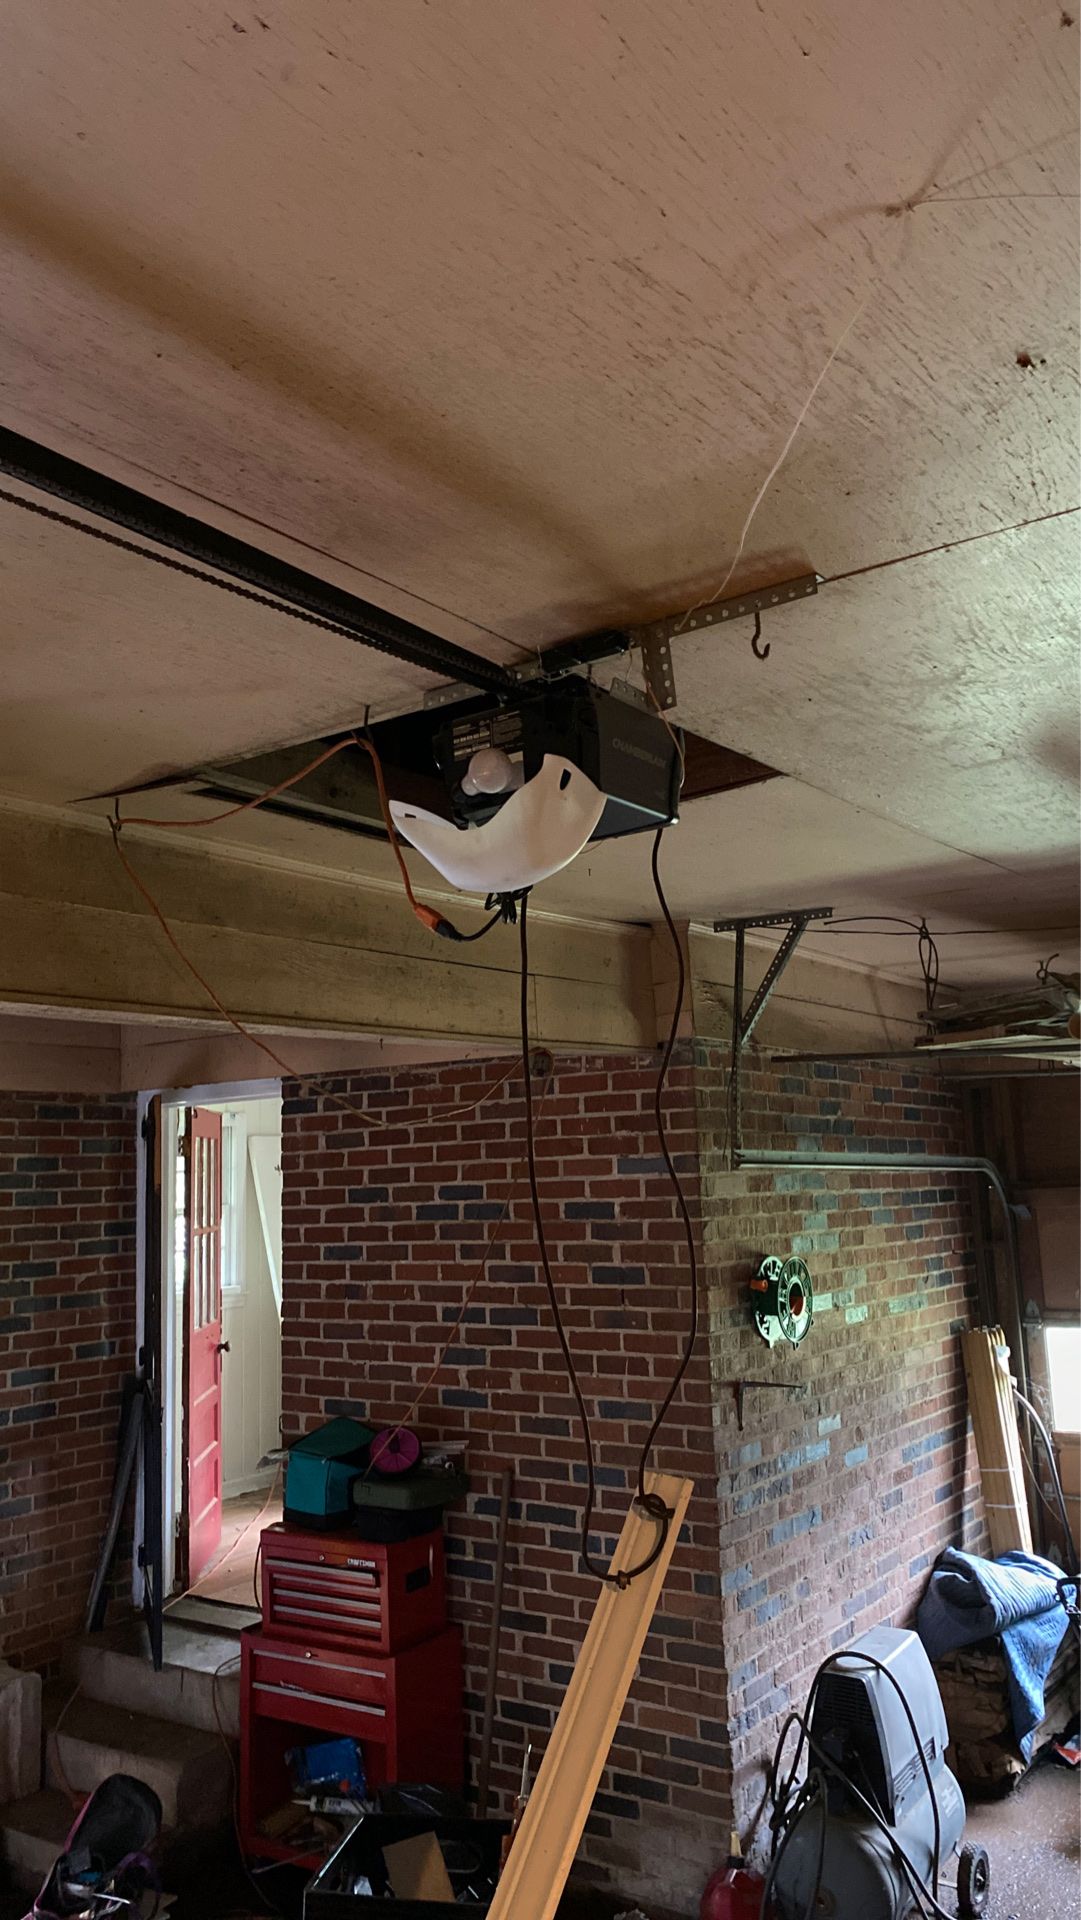 Chamberlain single car garage door opener like new installed and the door was too heavy must come here and take it down no remote and the door was t